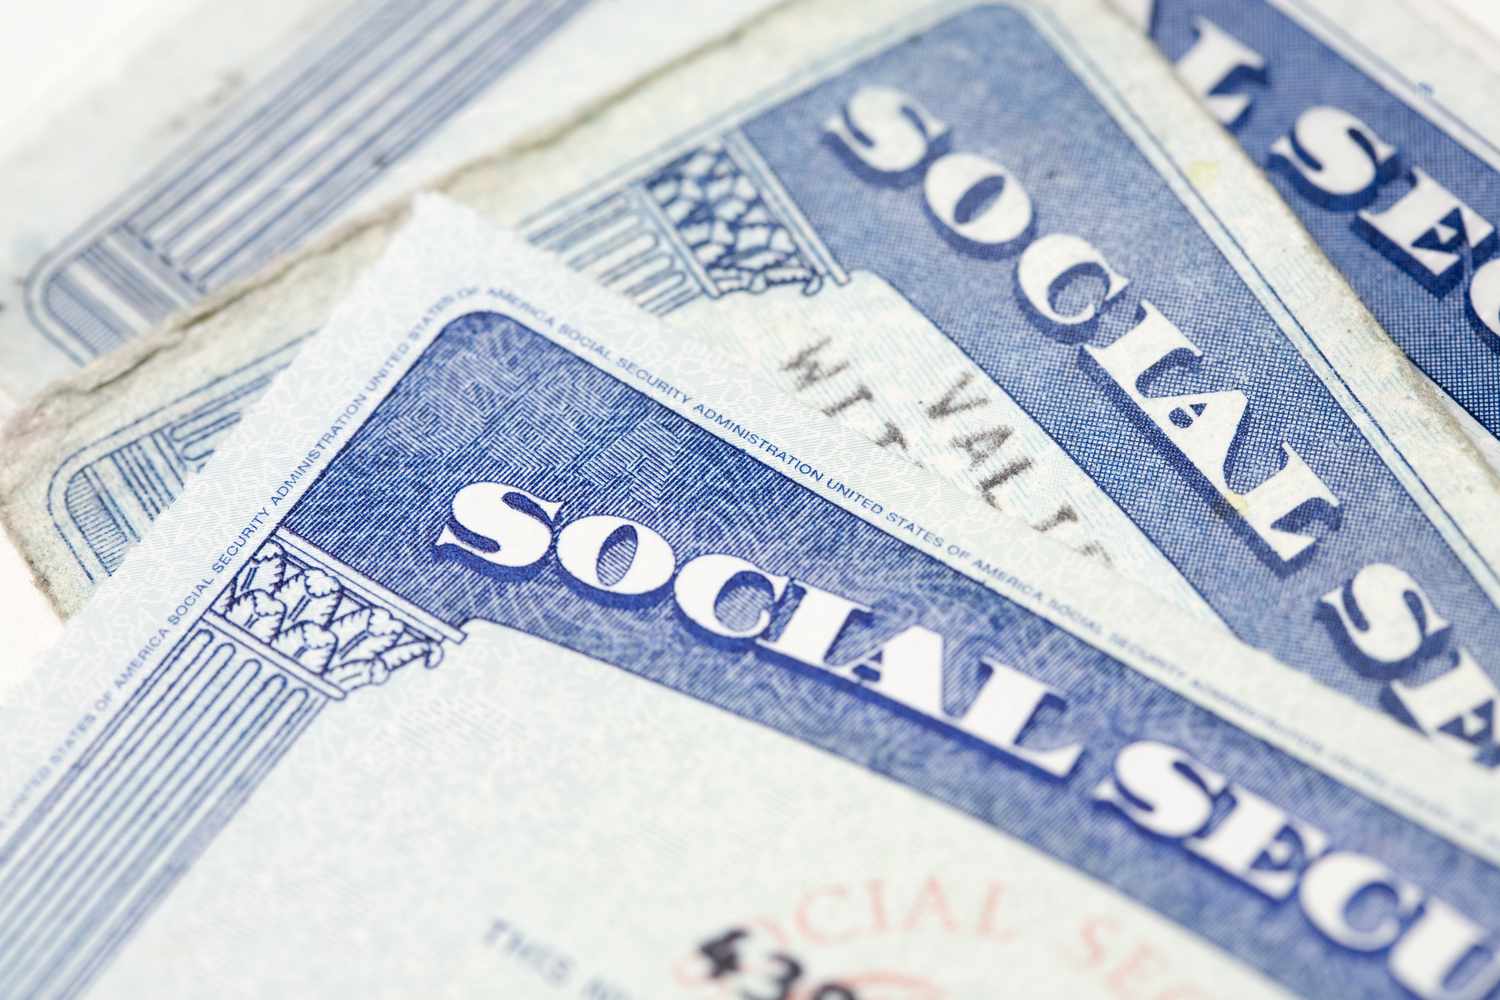 The Ultimate Guide To Earn the Highest Social Security Check of $4,873 Every Month